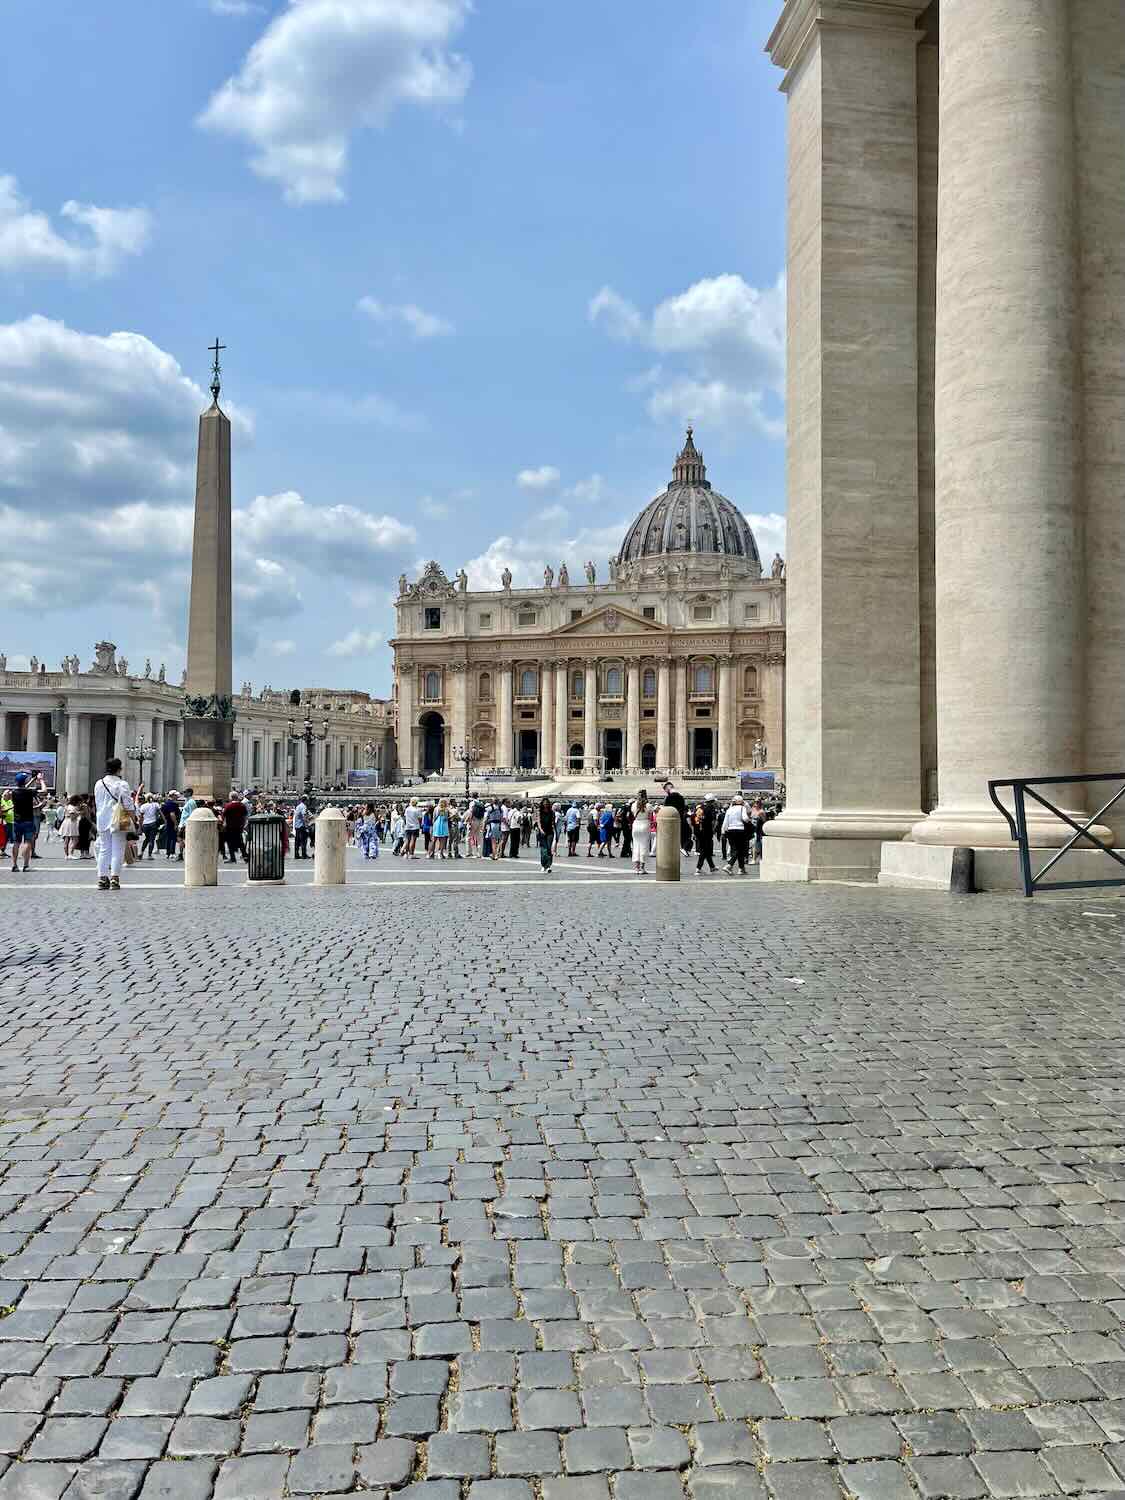 A view of St. Peter's Basilica in Vatican City from St. Peter's Square, with the obelisk in the foreground. The square is bustling with tourists, and the sky is partly cloudy.